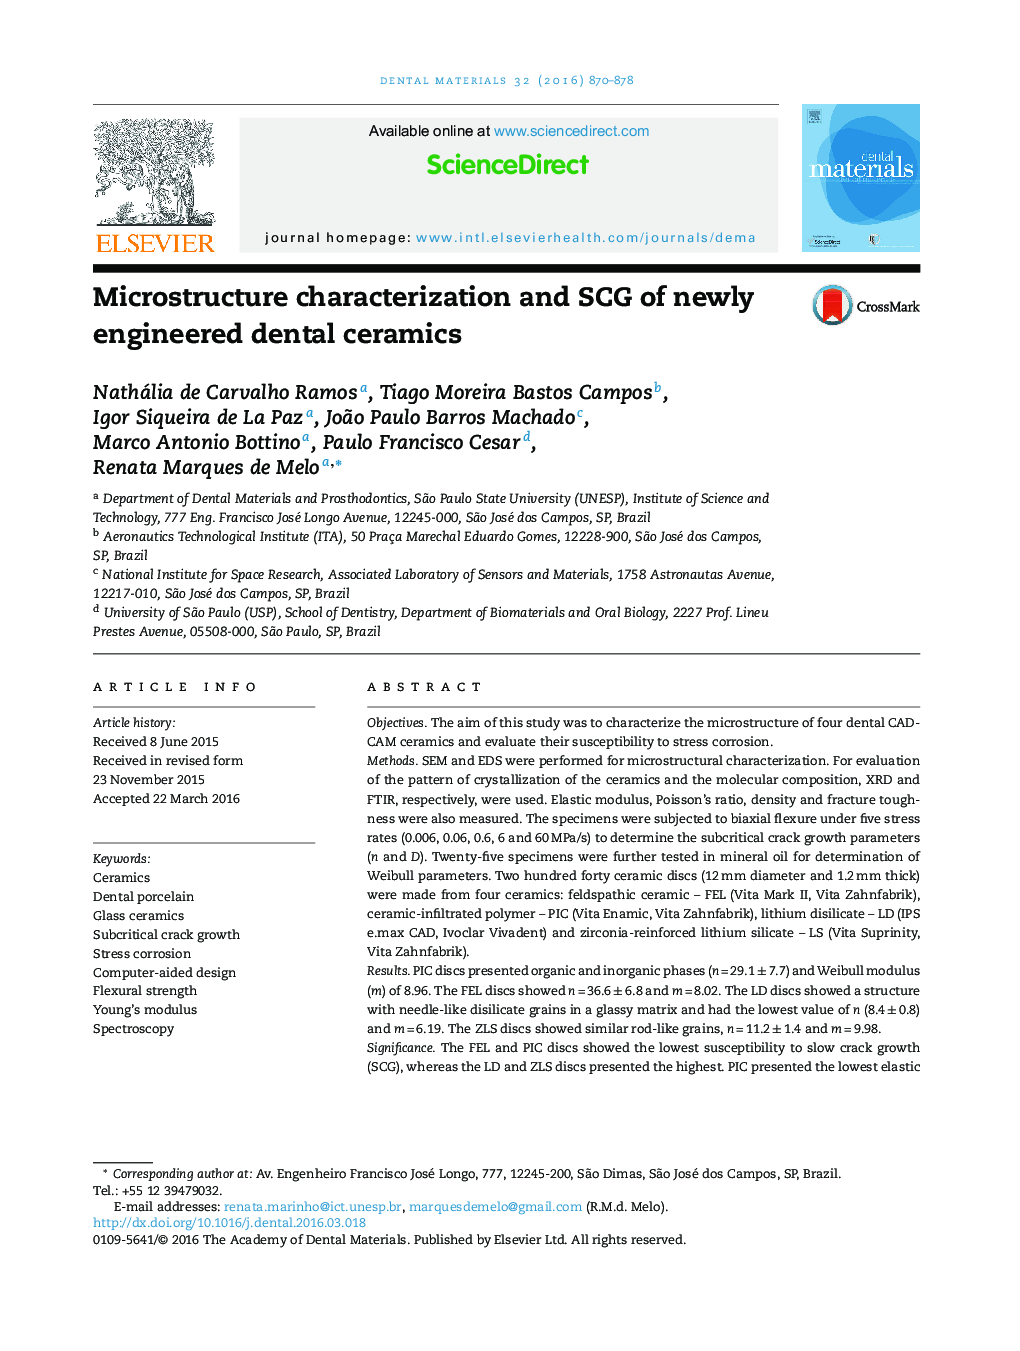 Microstructure characterization and SCG of newly engineered dental ceramics